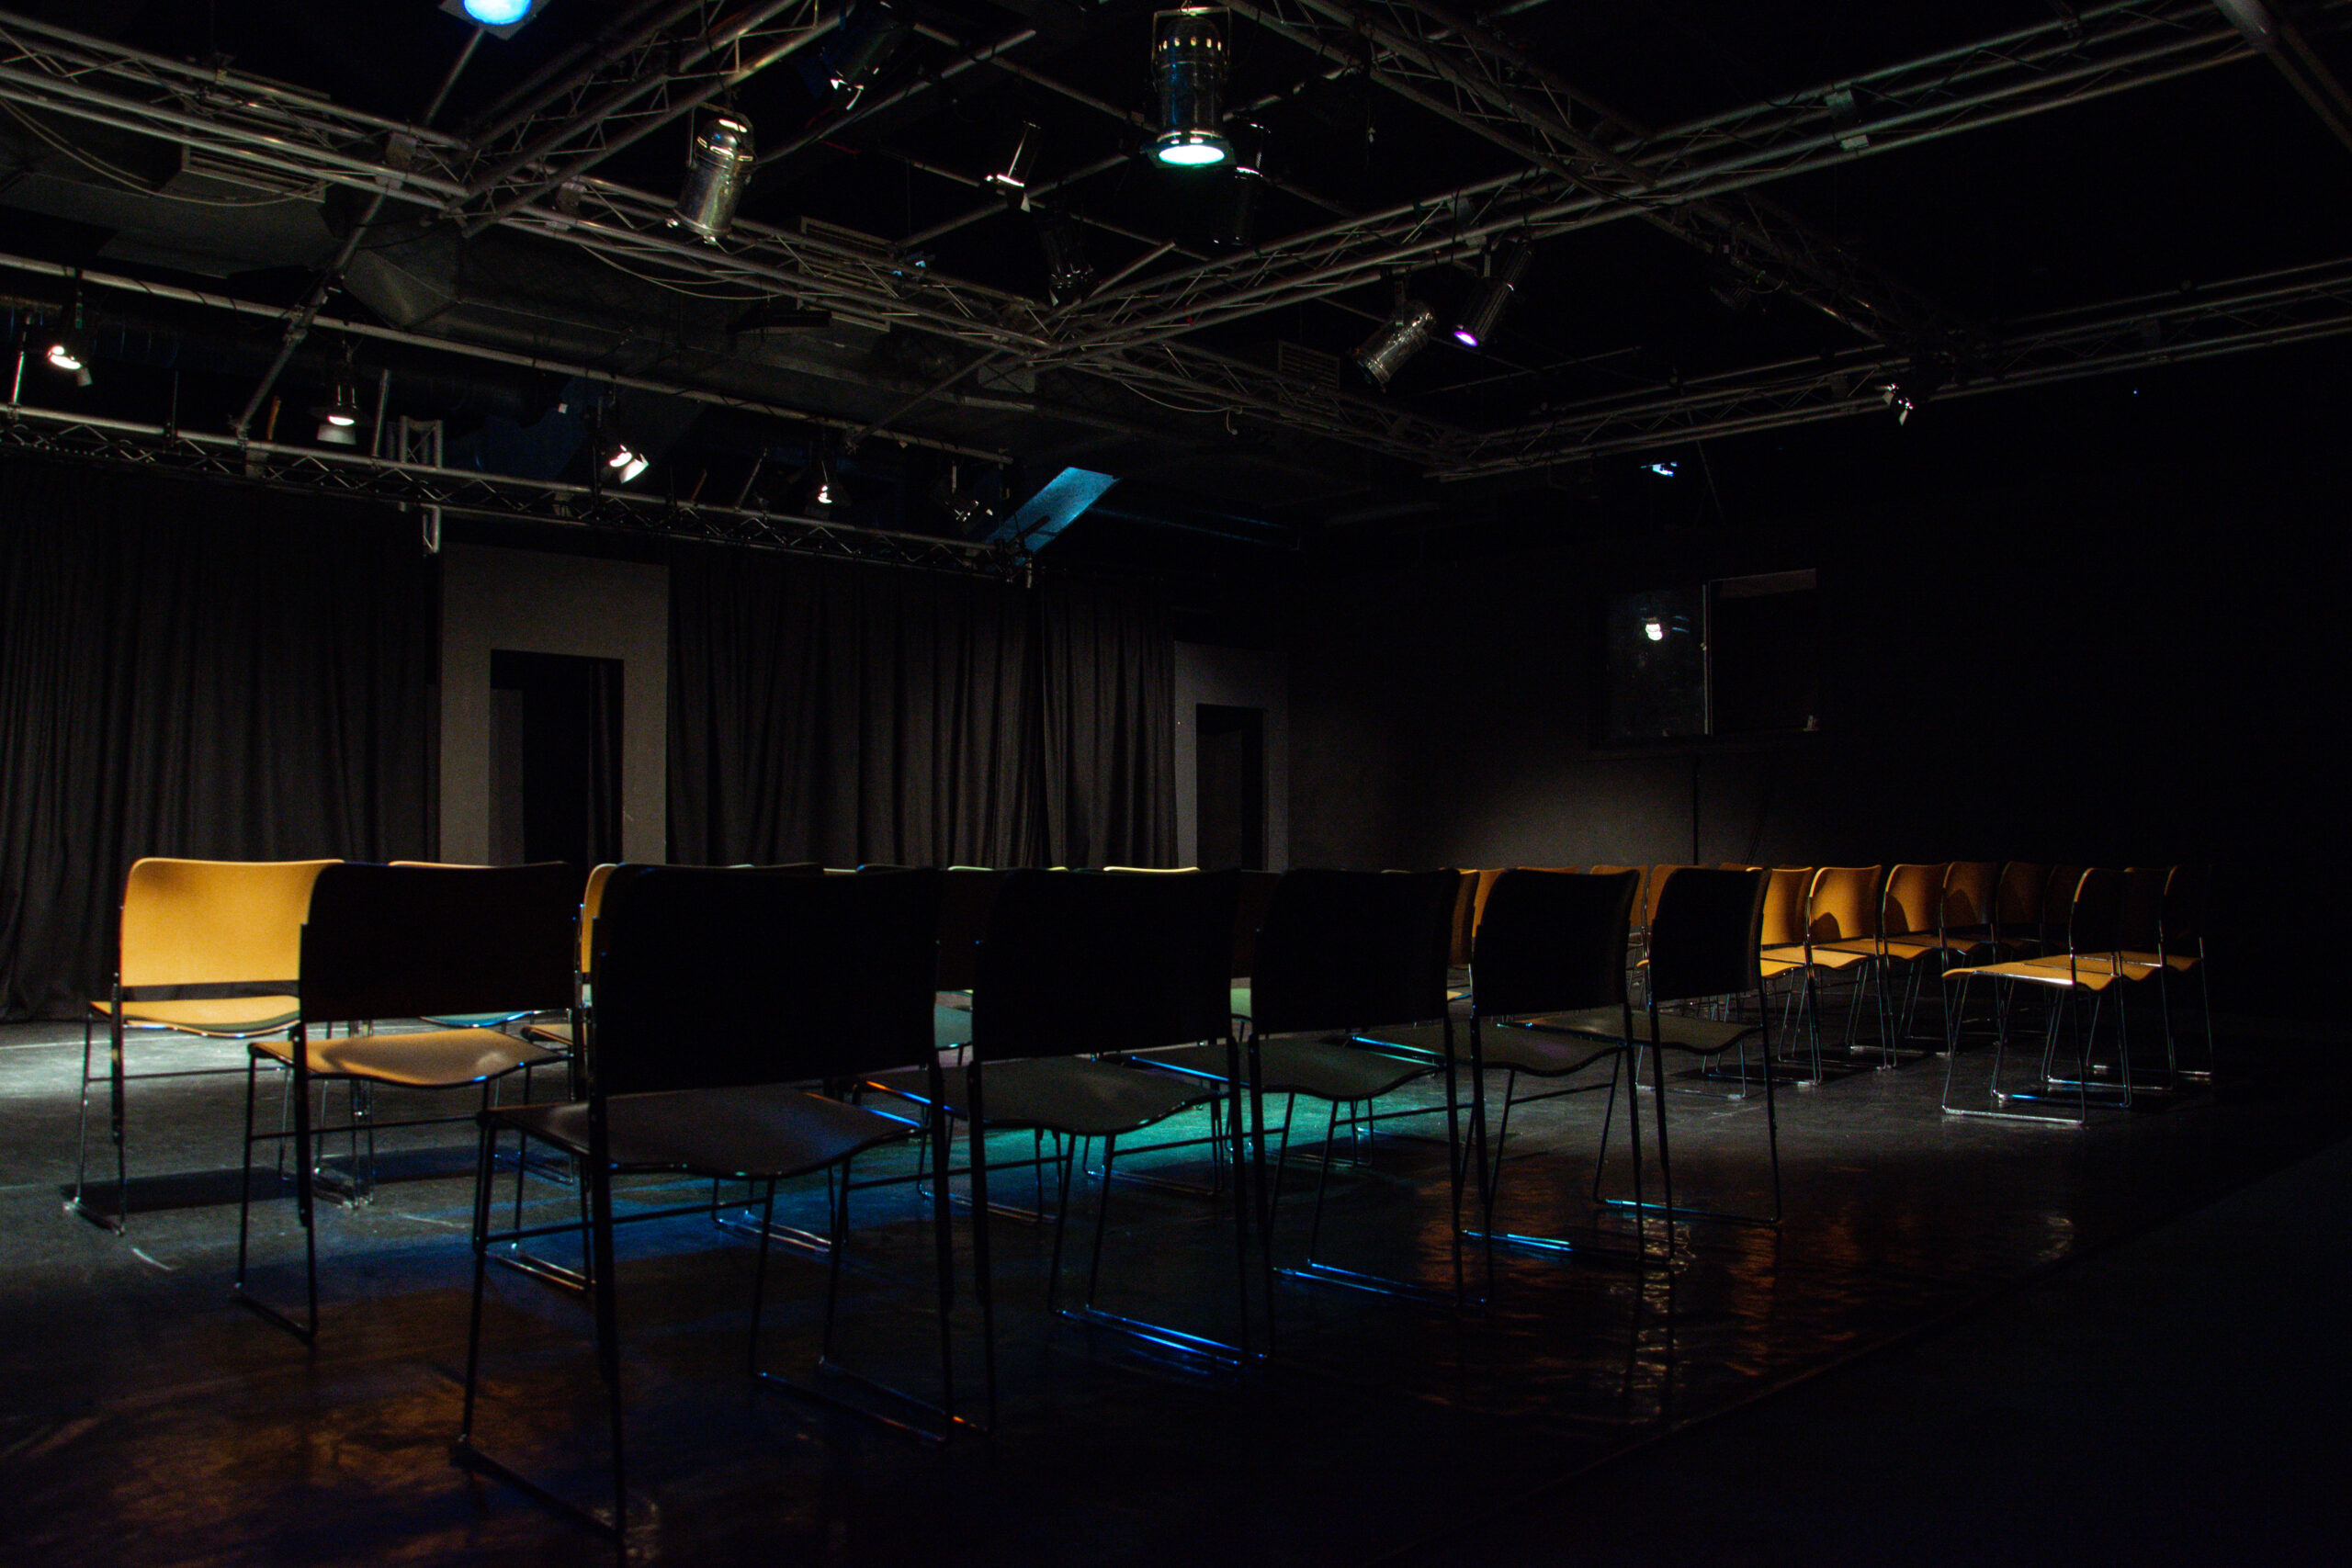 performing and music performance space set up with chairs and illuminated with lighting